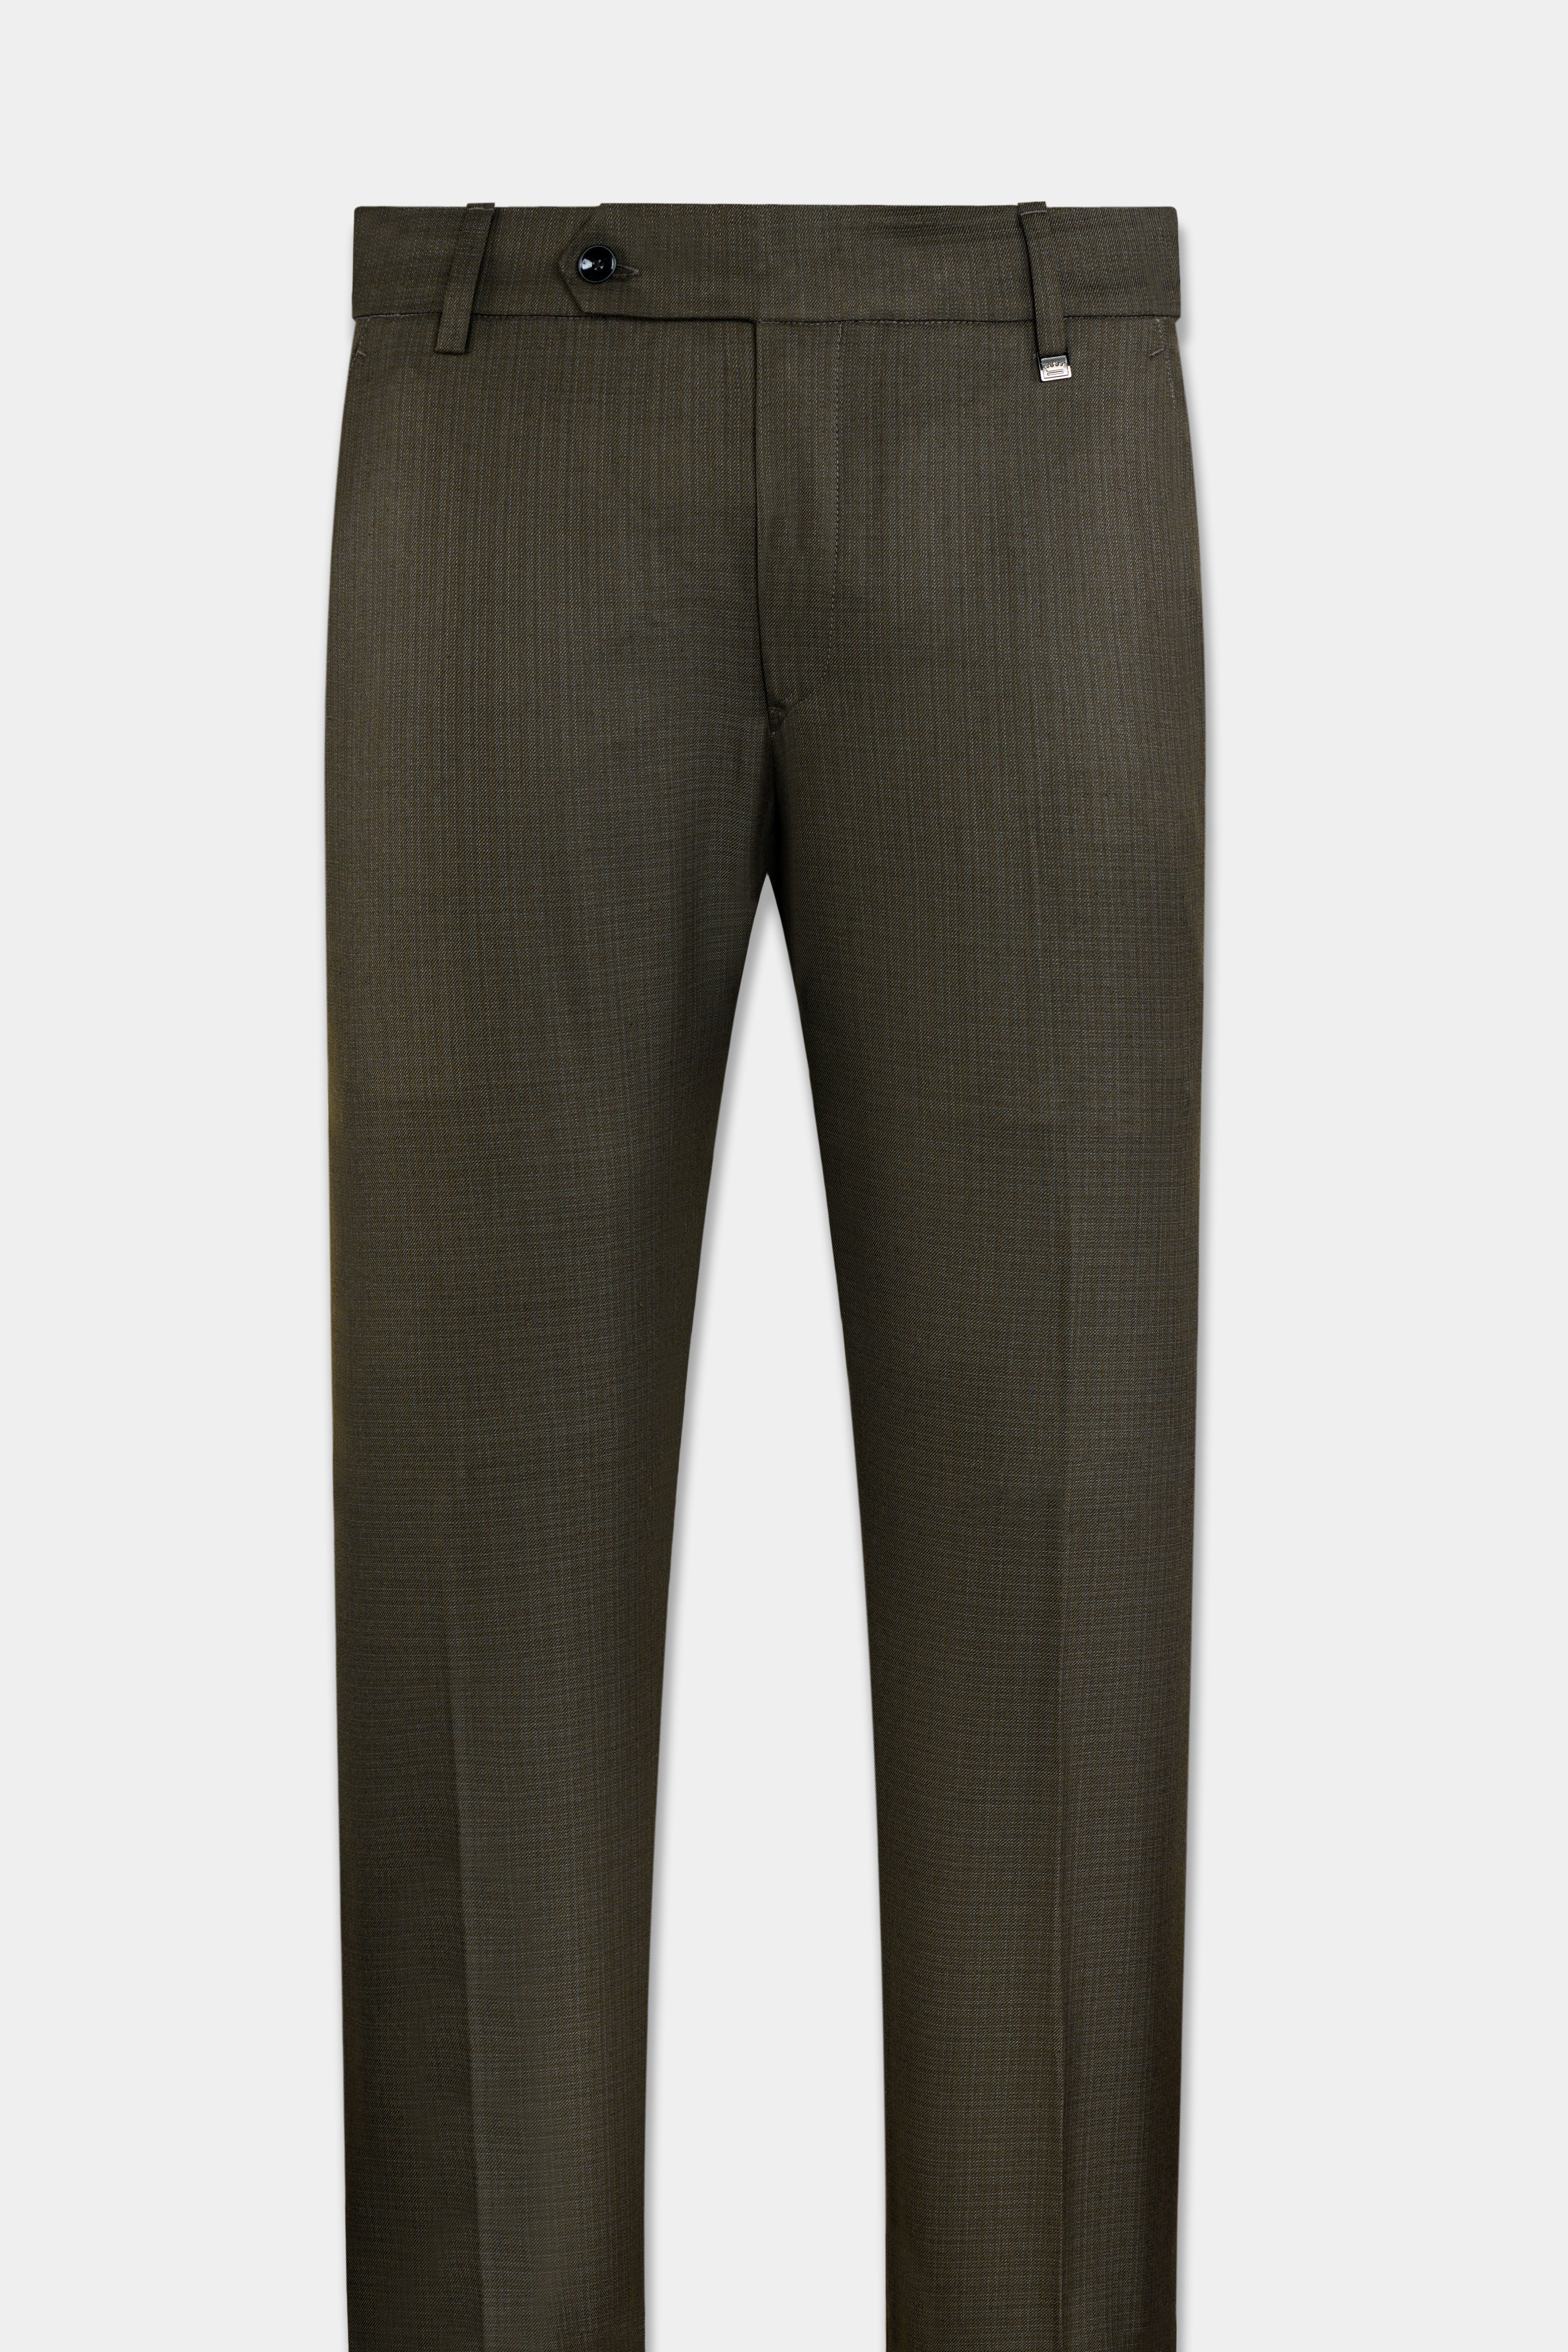 Eclipse Brown Wool Rich Pant